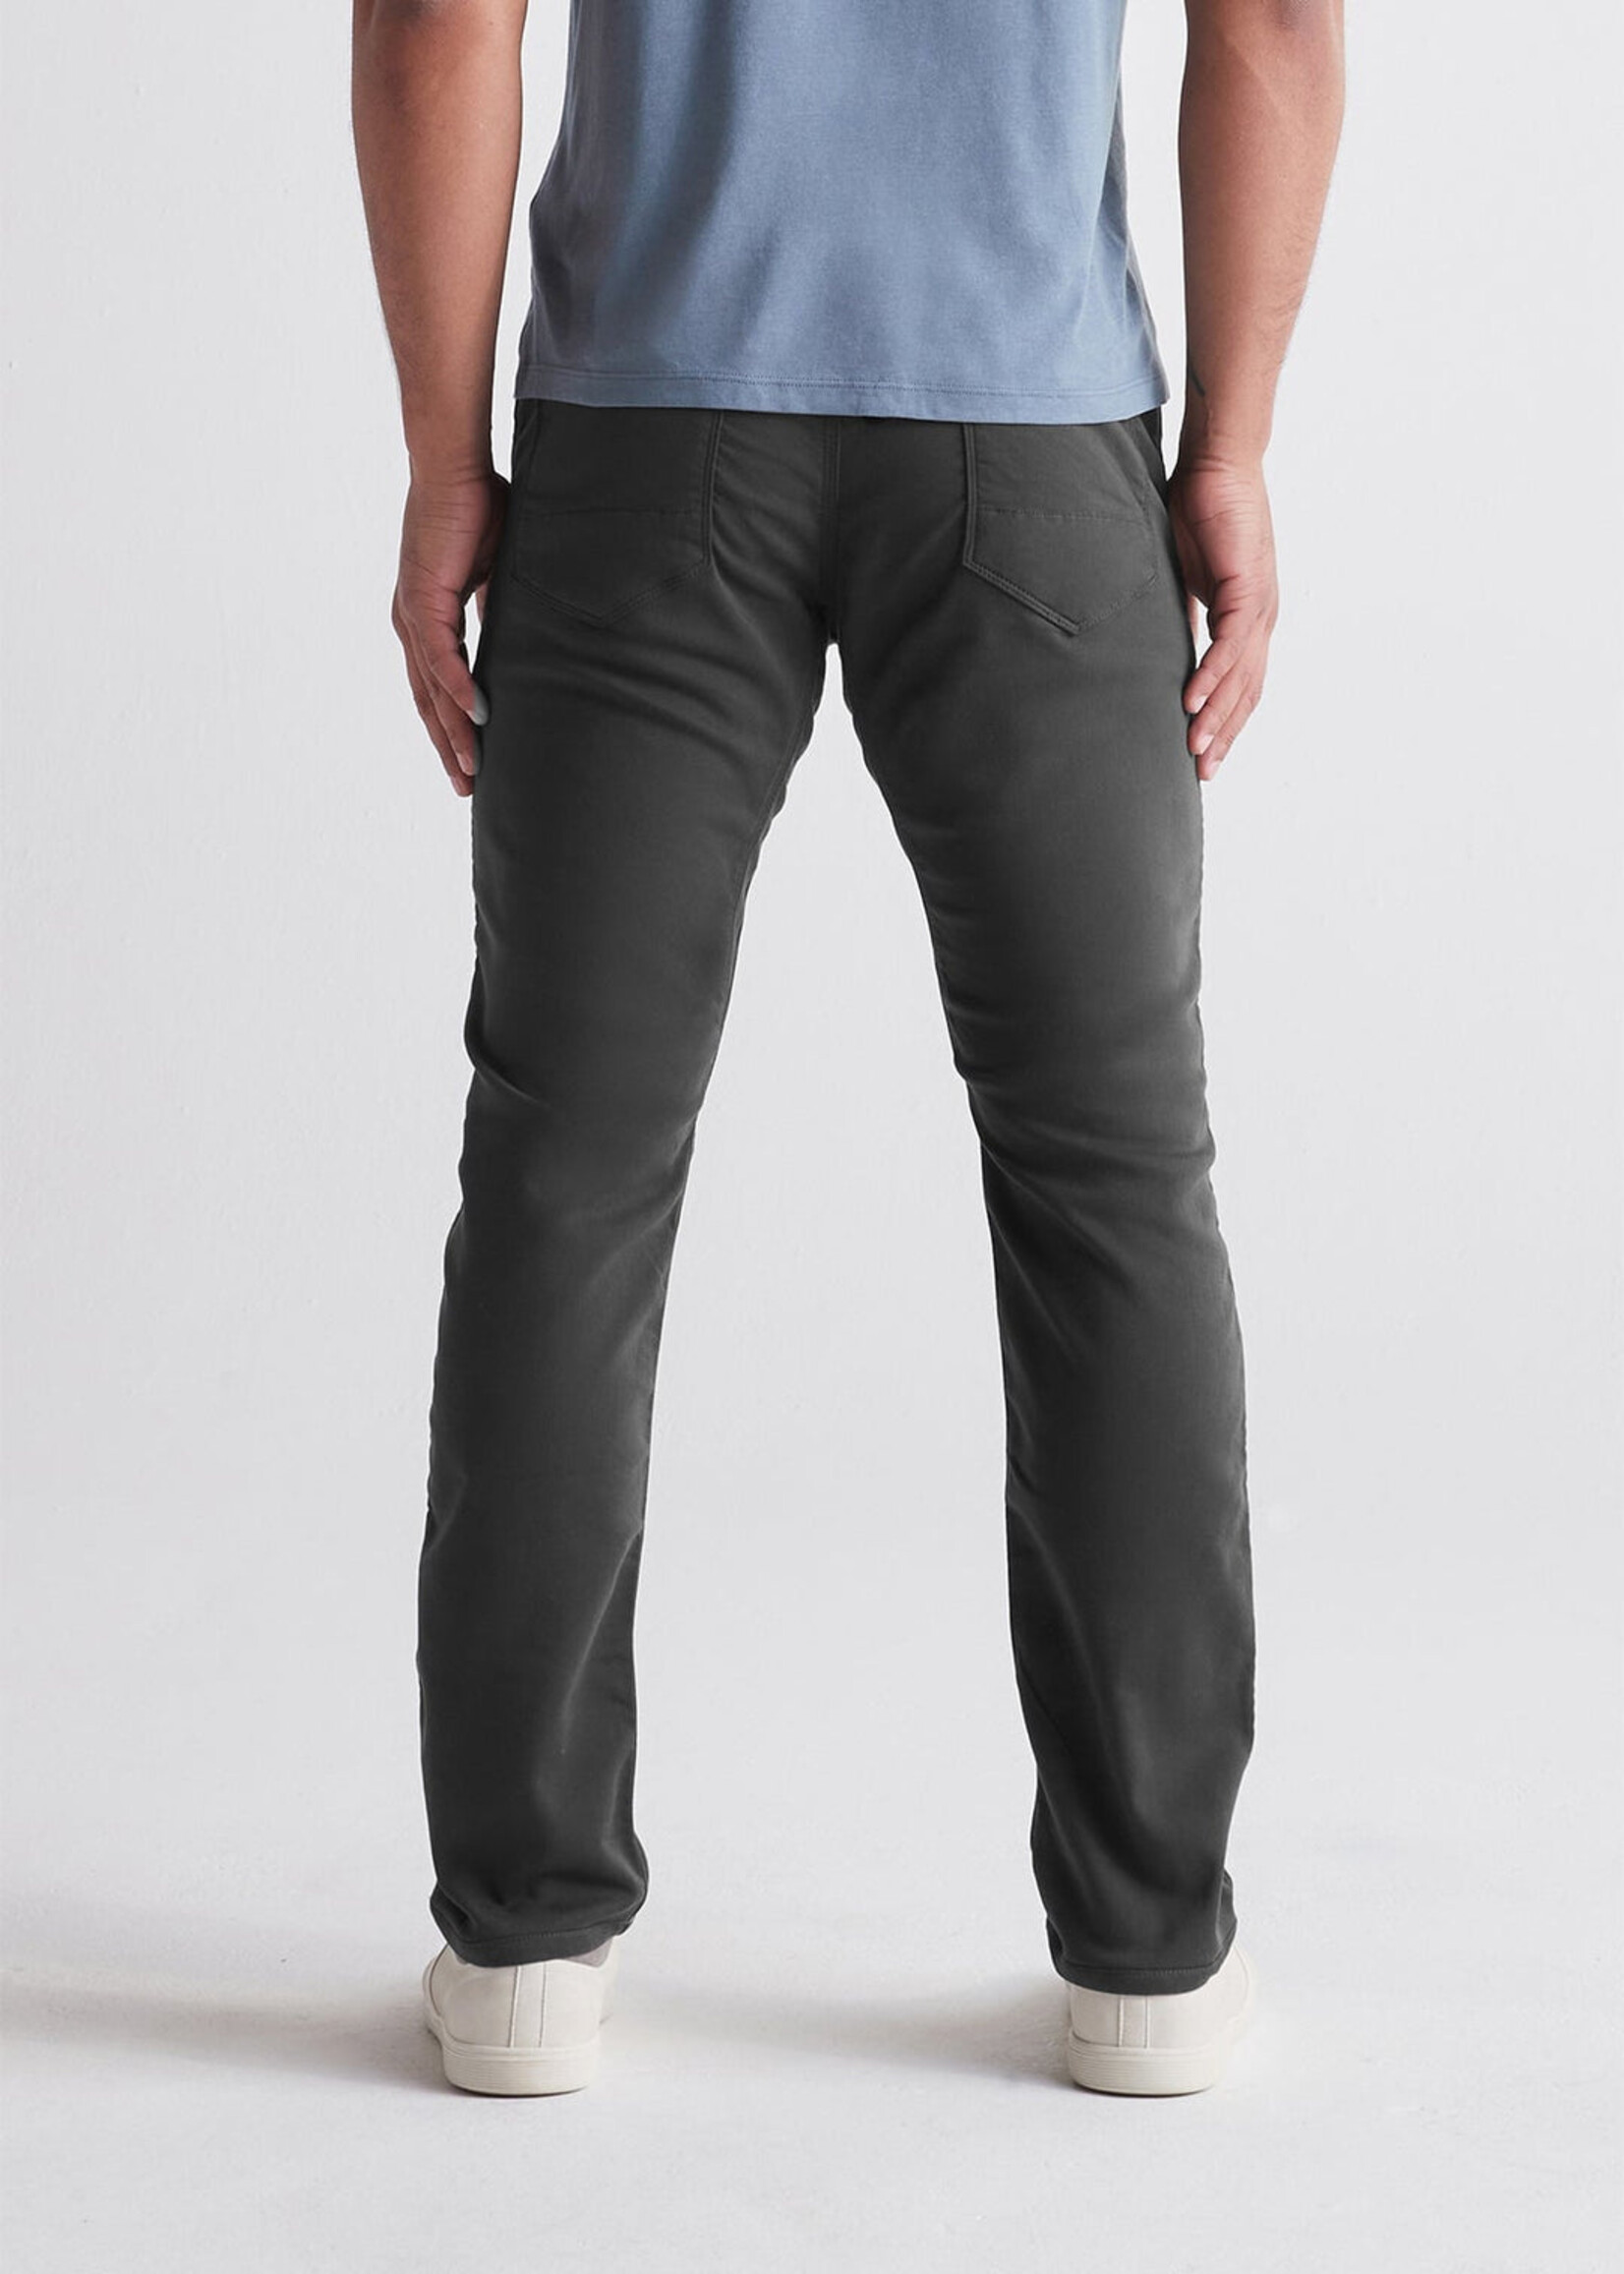 DUER No Sweat Pant Relaxed Taper - Slate